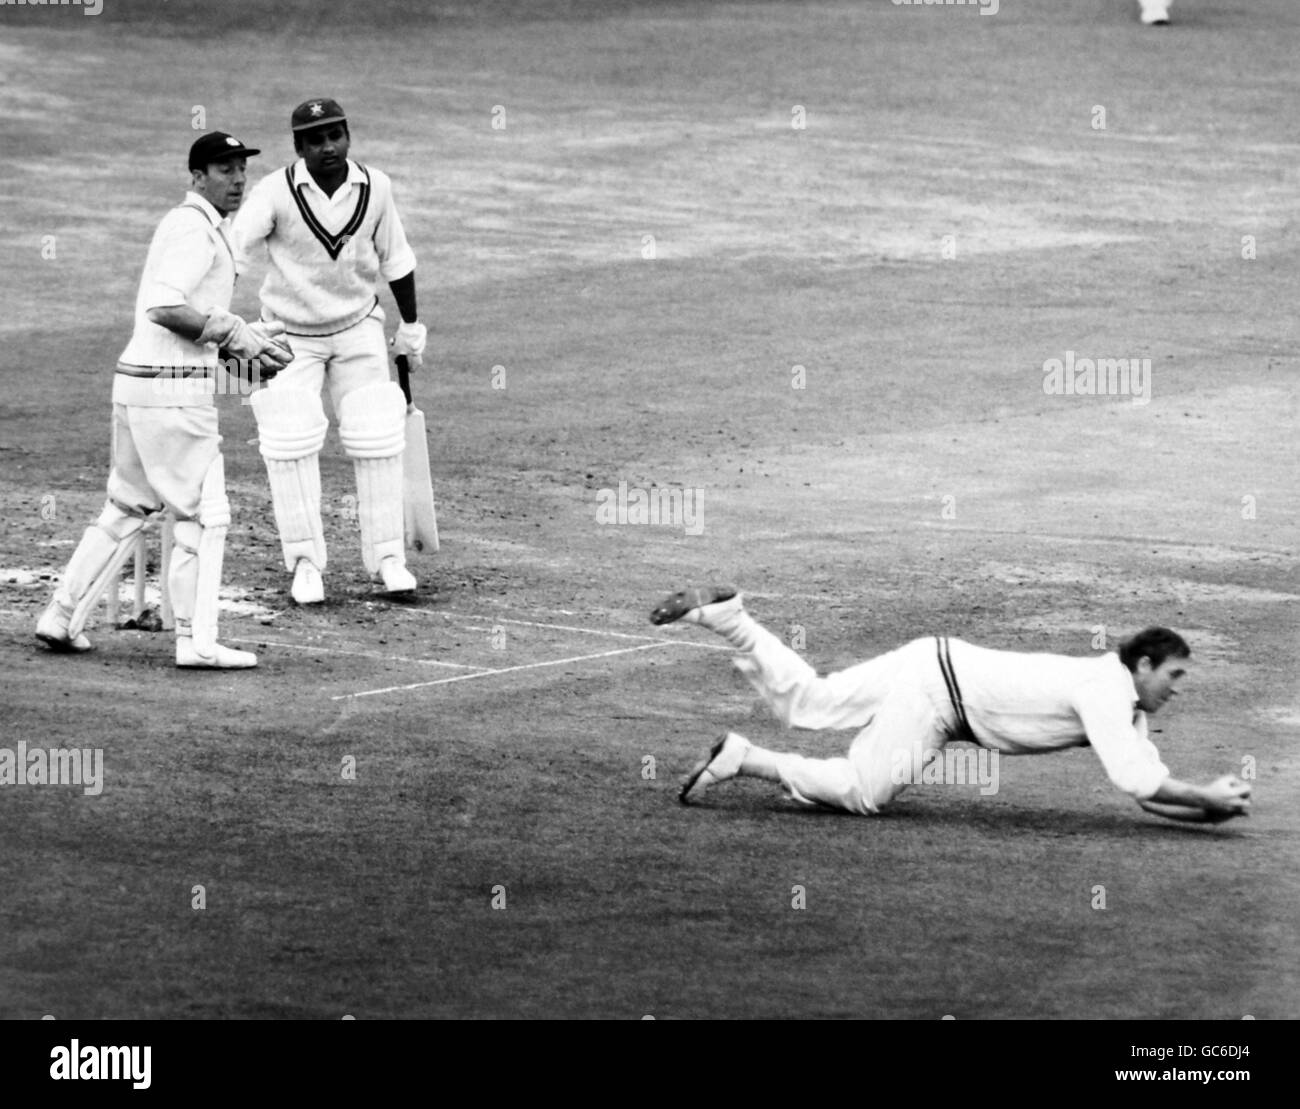 Cricket - County Championships 1968 - Middlesex v Northamptonshire - Lord's Cricket Ground. M.Mohammed plays a ball from H.C.Latchman and is caught by P.Parfitt. Stock Photo